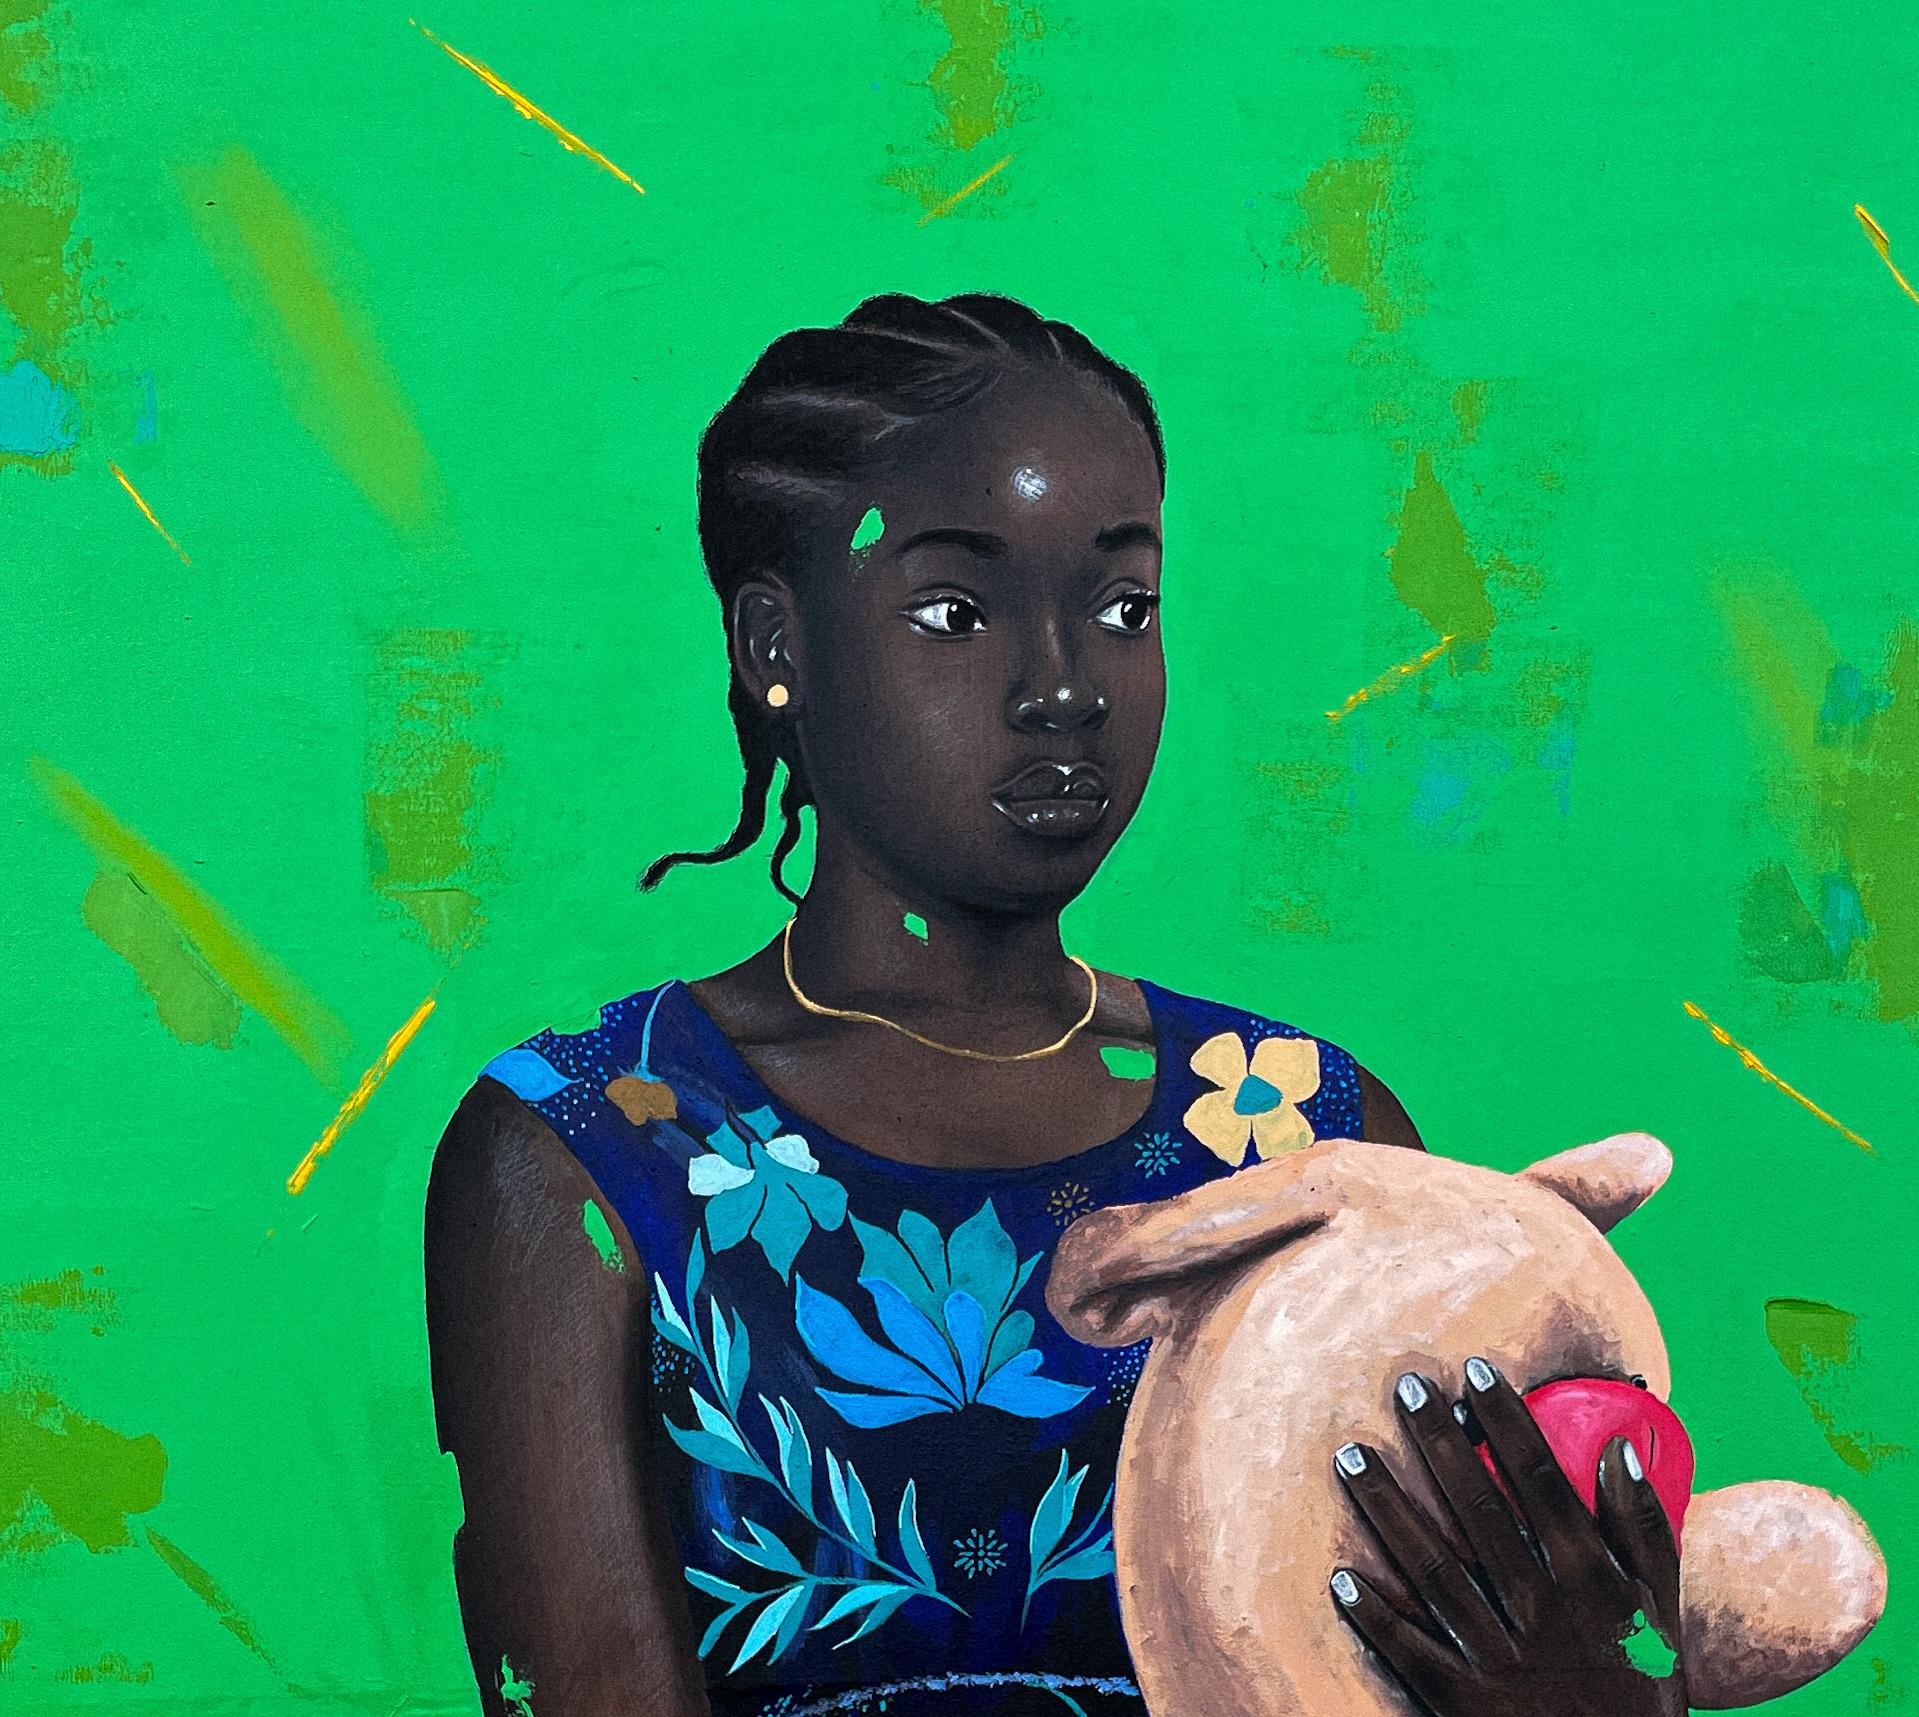 Girl Child and Her Companion 2 - Painting by Eyitayo Alagbe